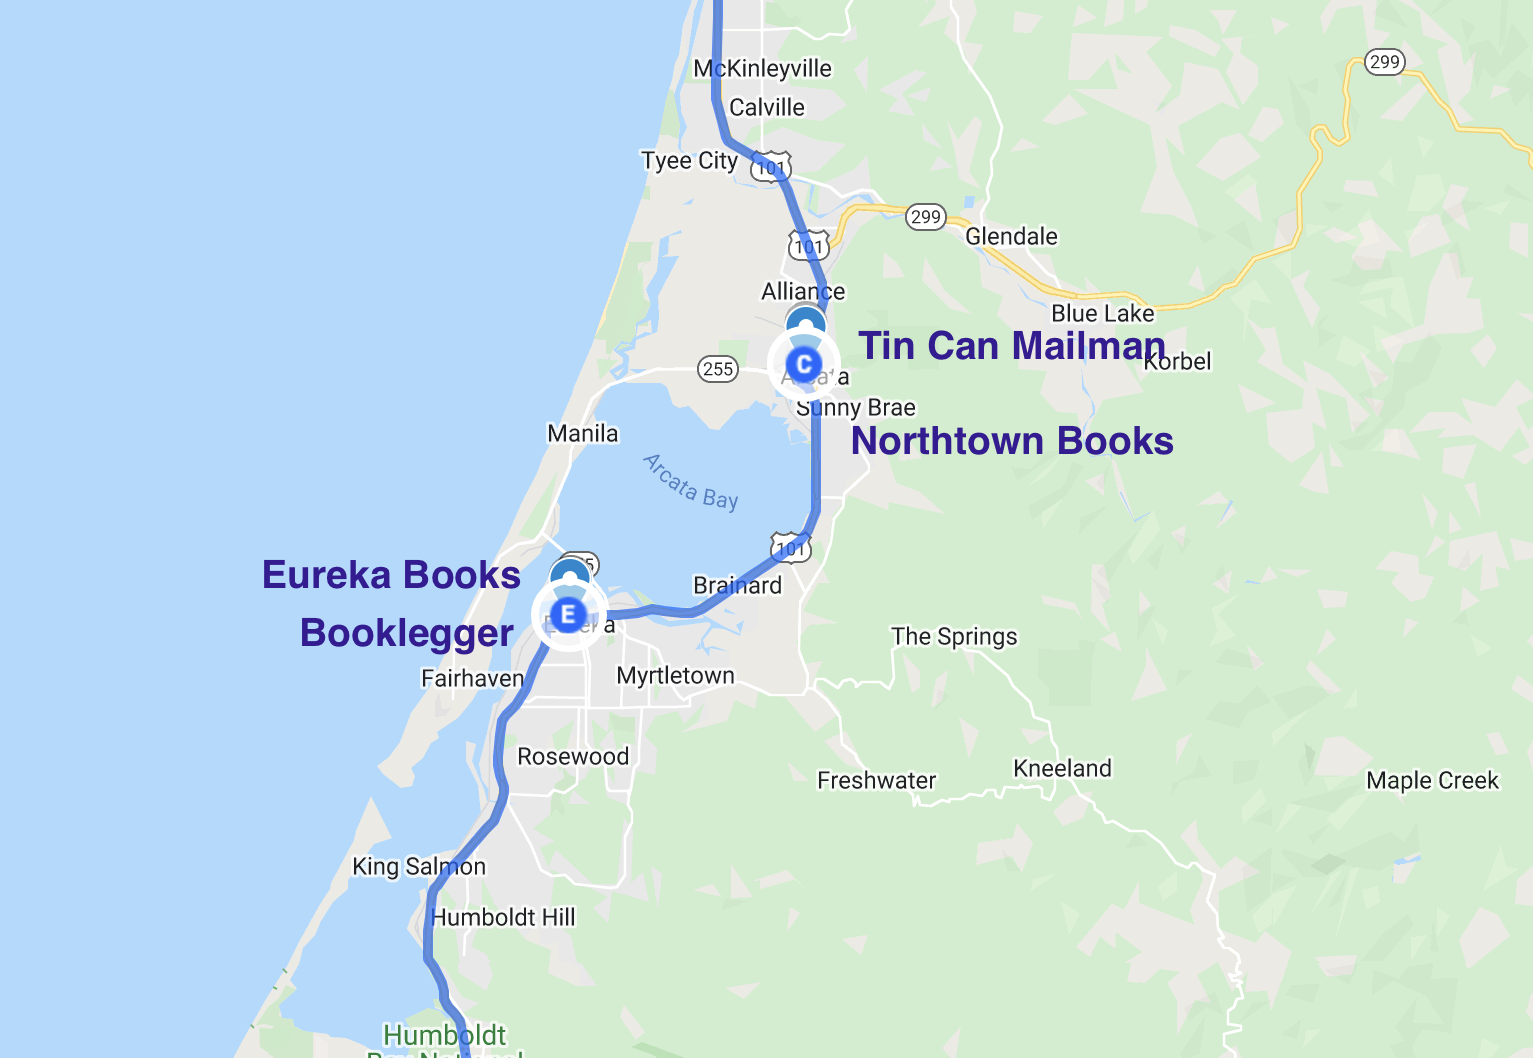 map of literary stops in arcata and eureka oregon